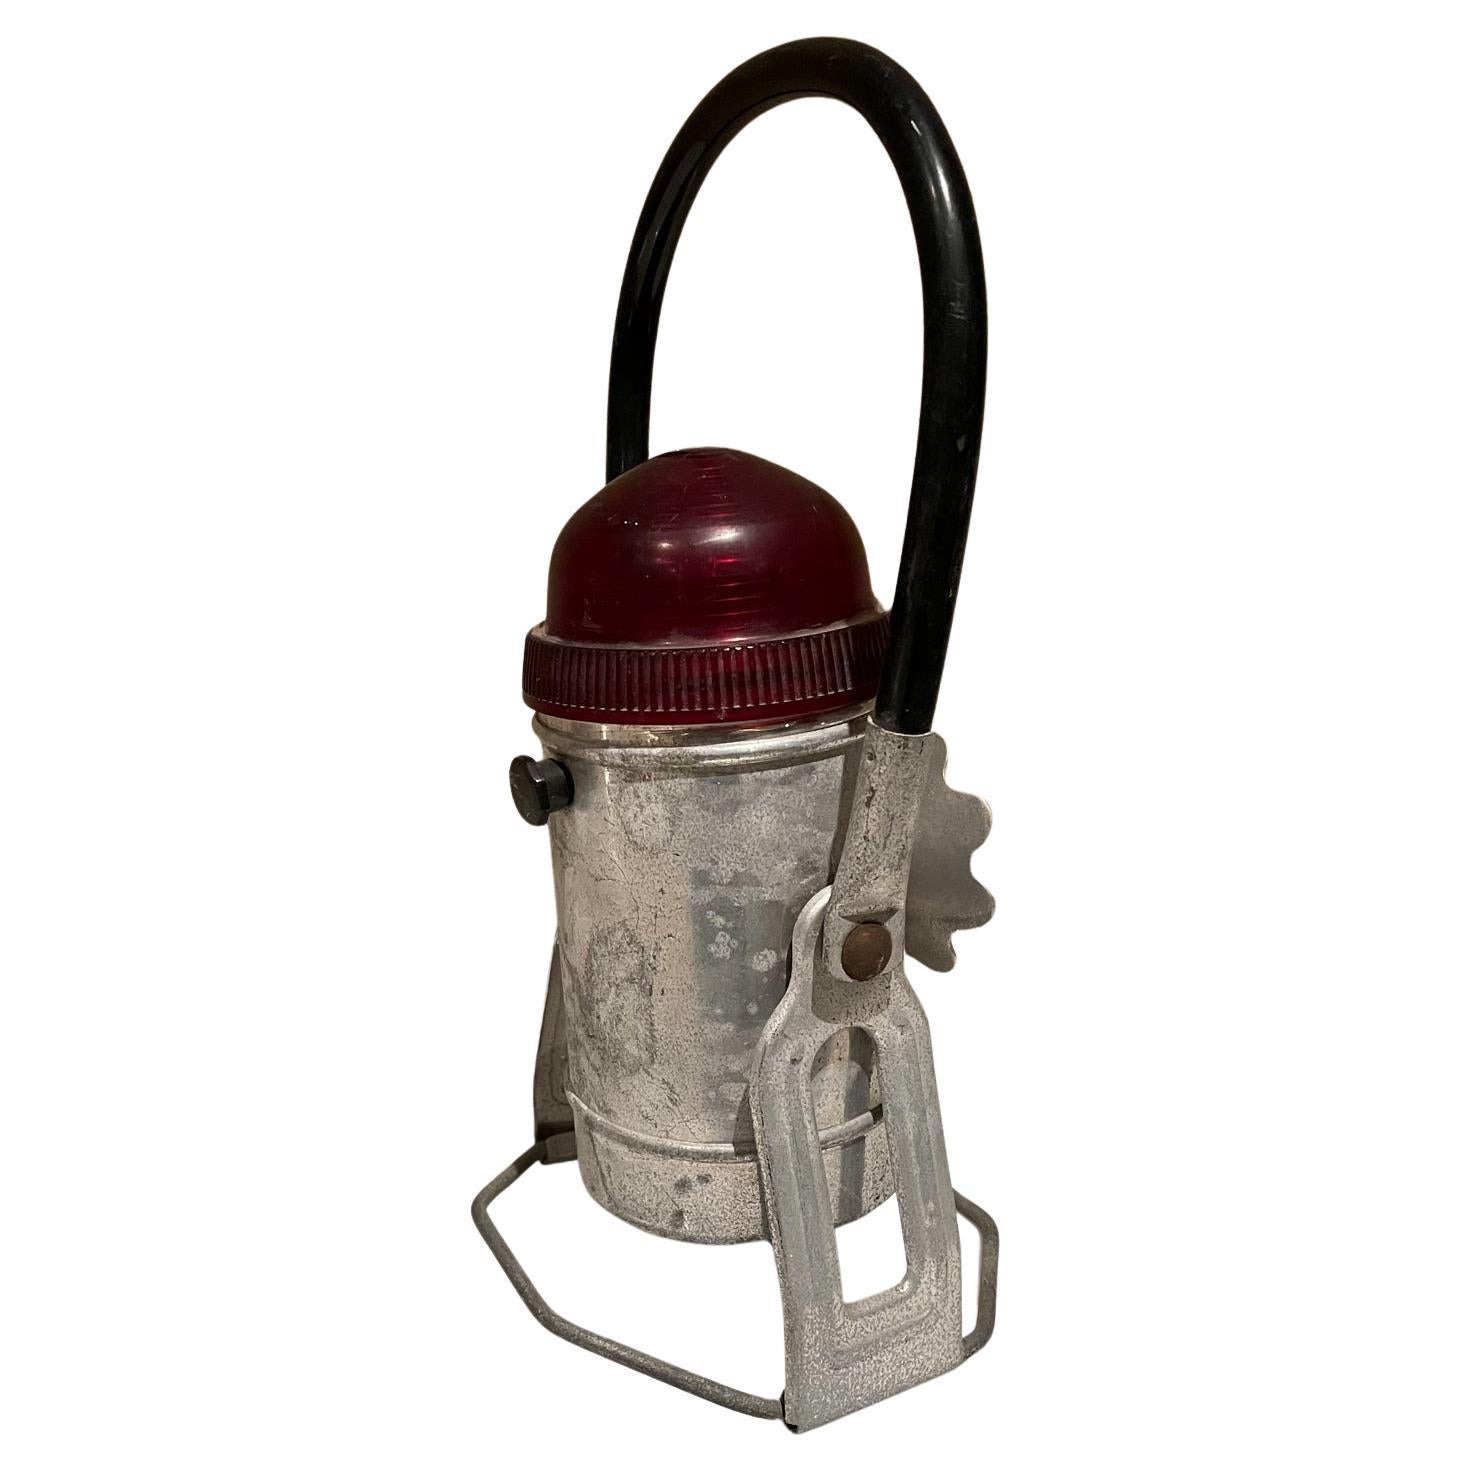 Railroad Light
1950s Handilite Co Sturgeon Bay Wisconsin Railroad portable red aluminum camp lantern lamp vintage
Hanging Light Hand Carry
Measures: 12 tall x 6.5 width x 5.5 depth
Preowned vintage unrestored condition. Minor losses present.